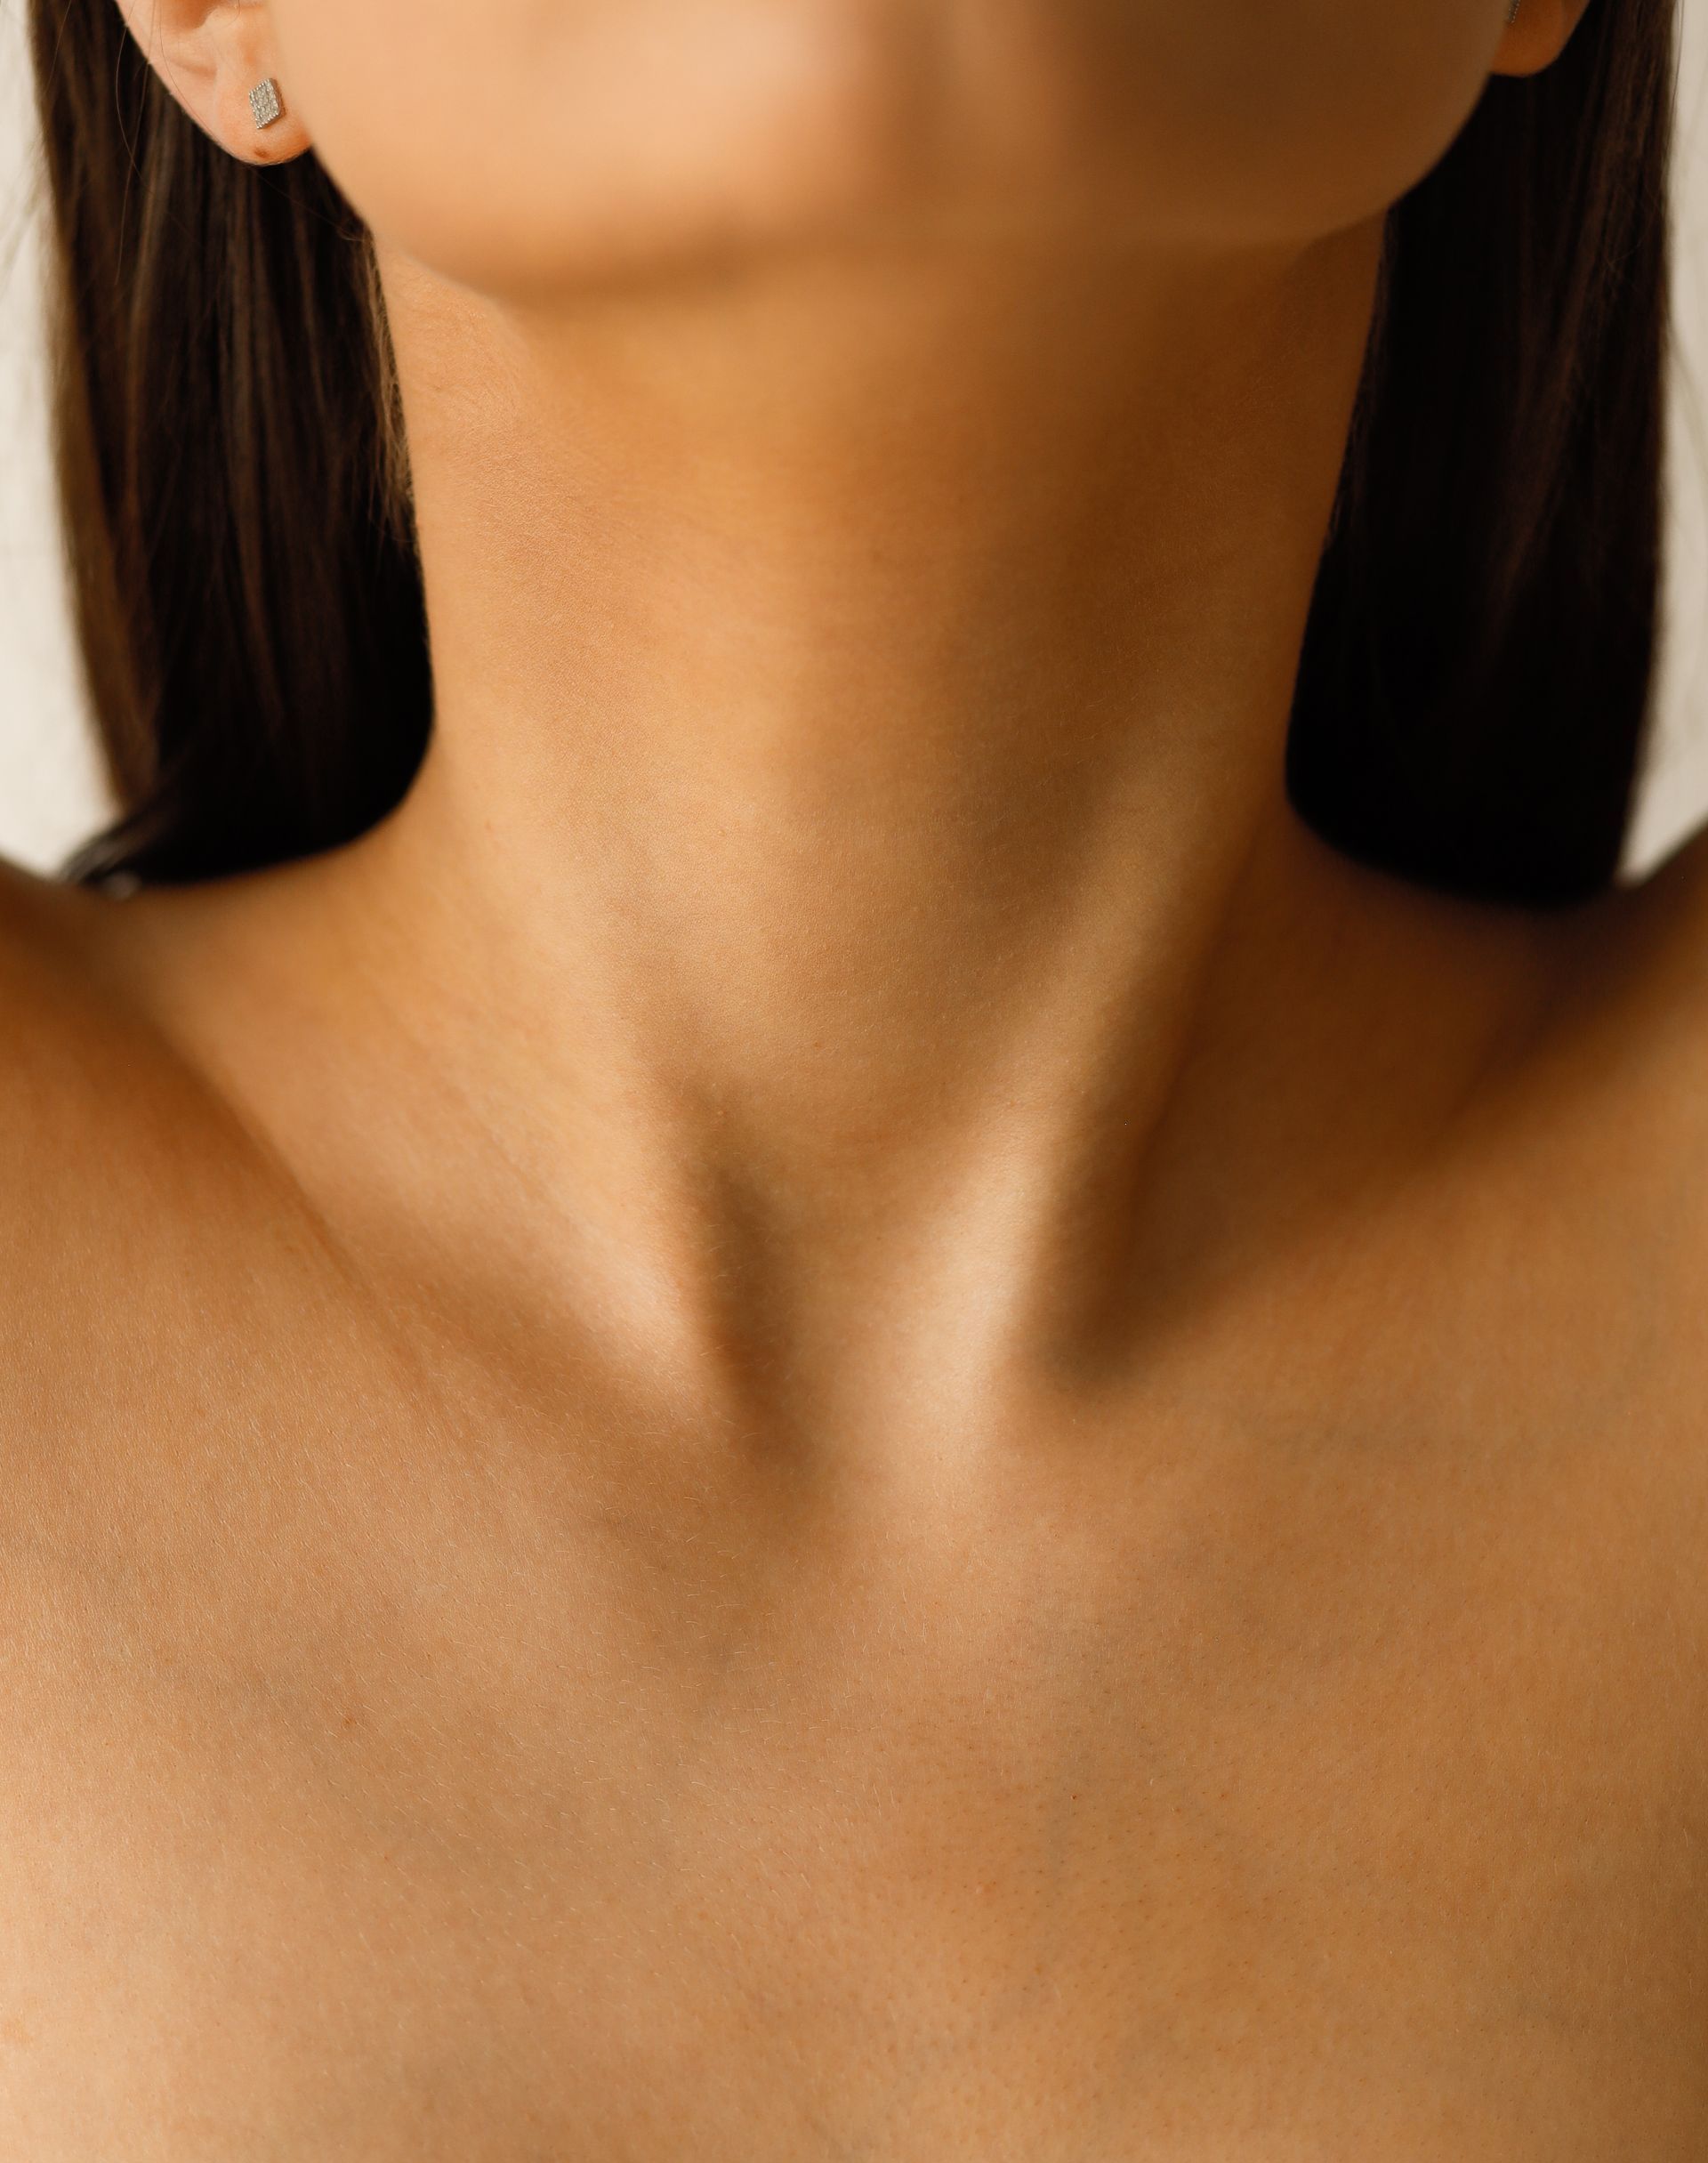 a close up of a woman 's neck and chest